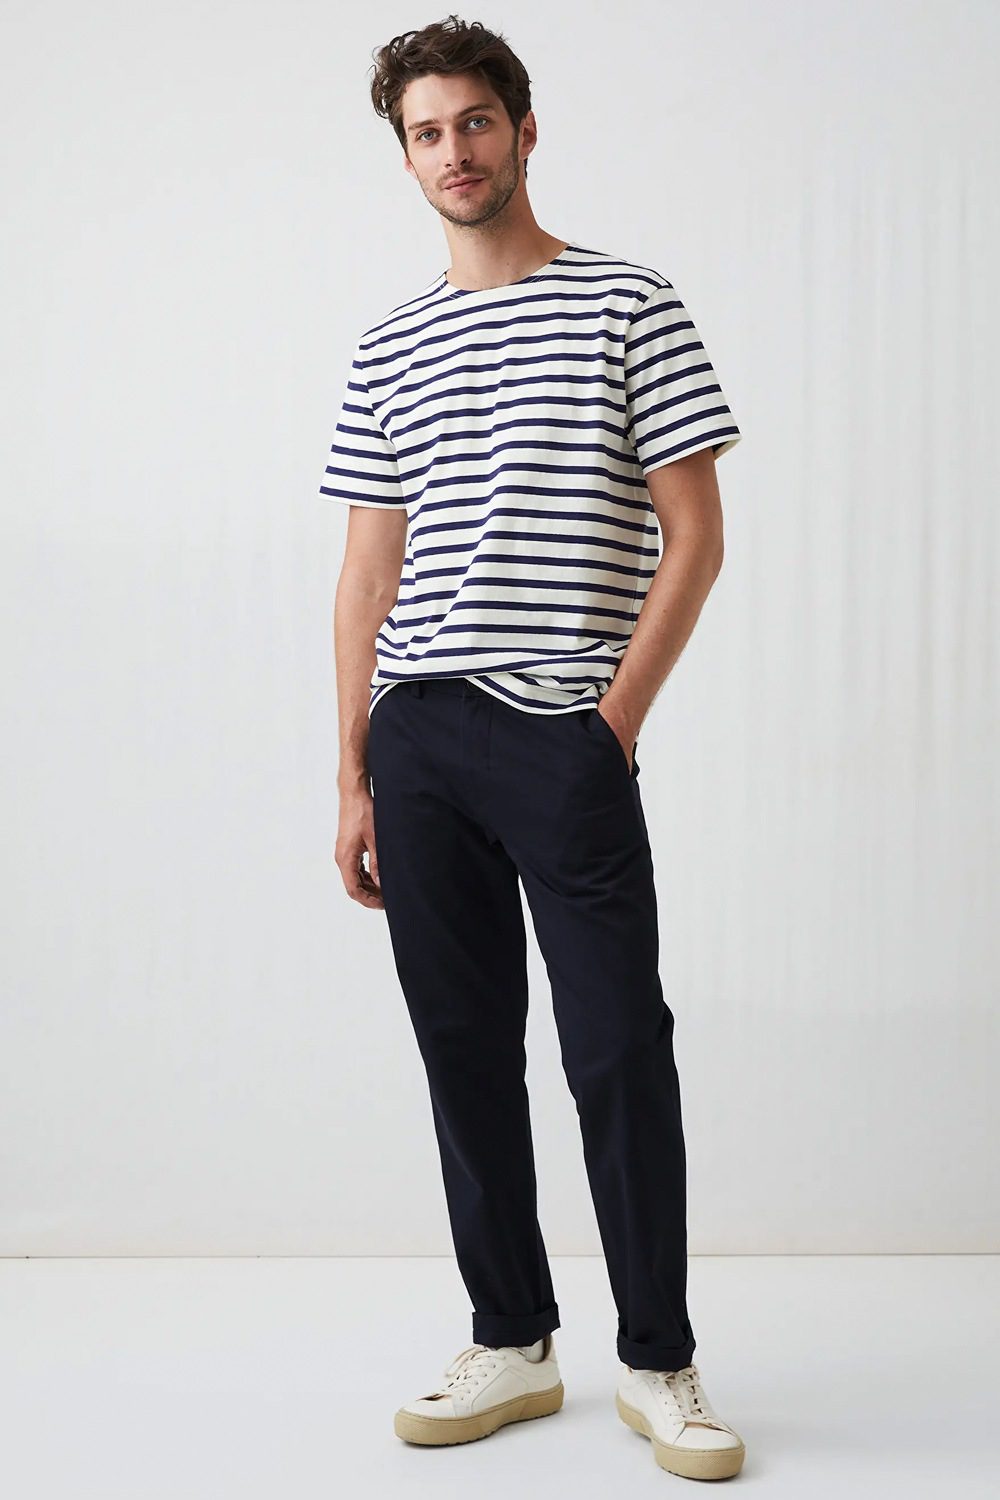 Top 9 Outfits for Summer (2022) Breton With Chinos